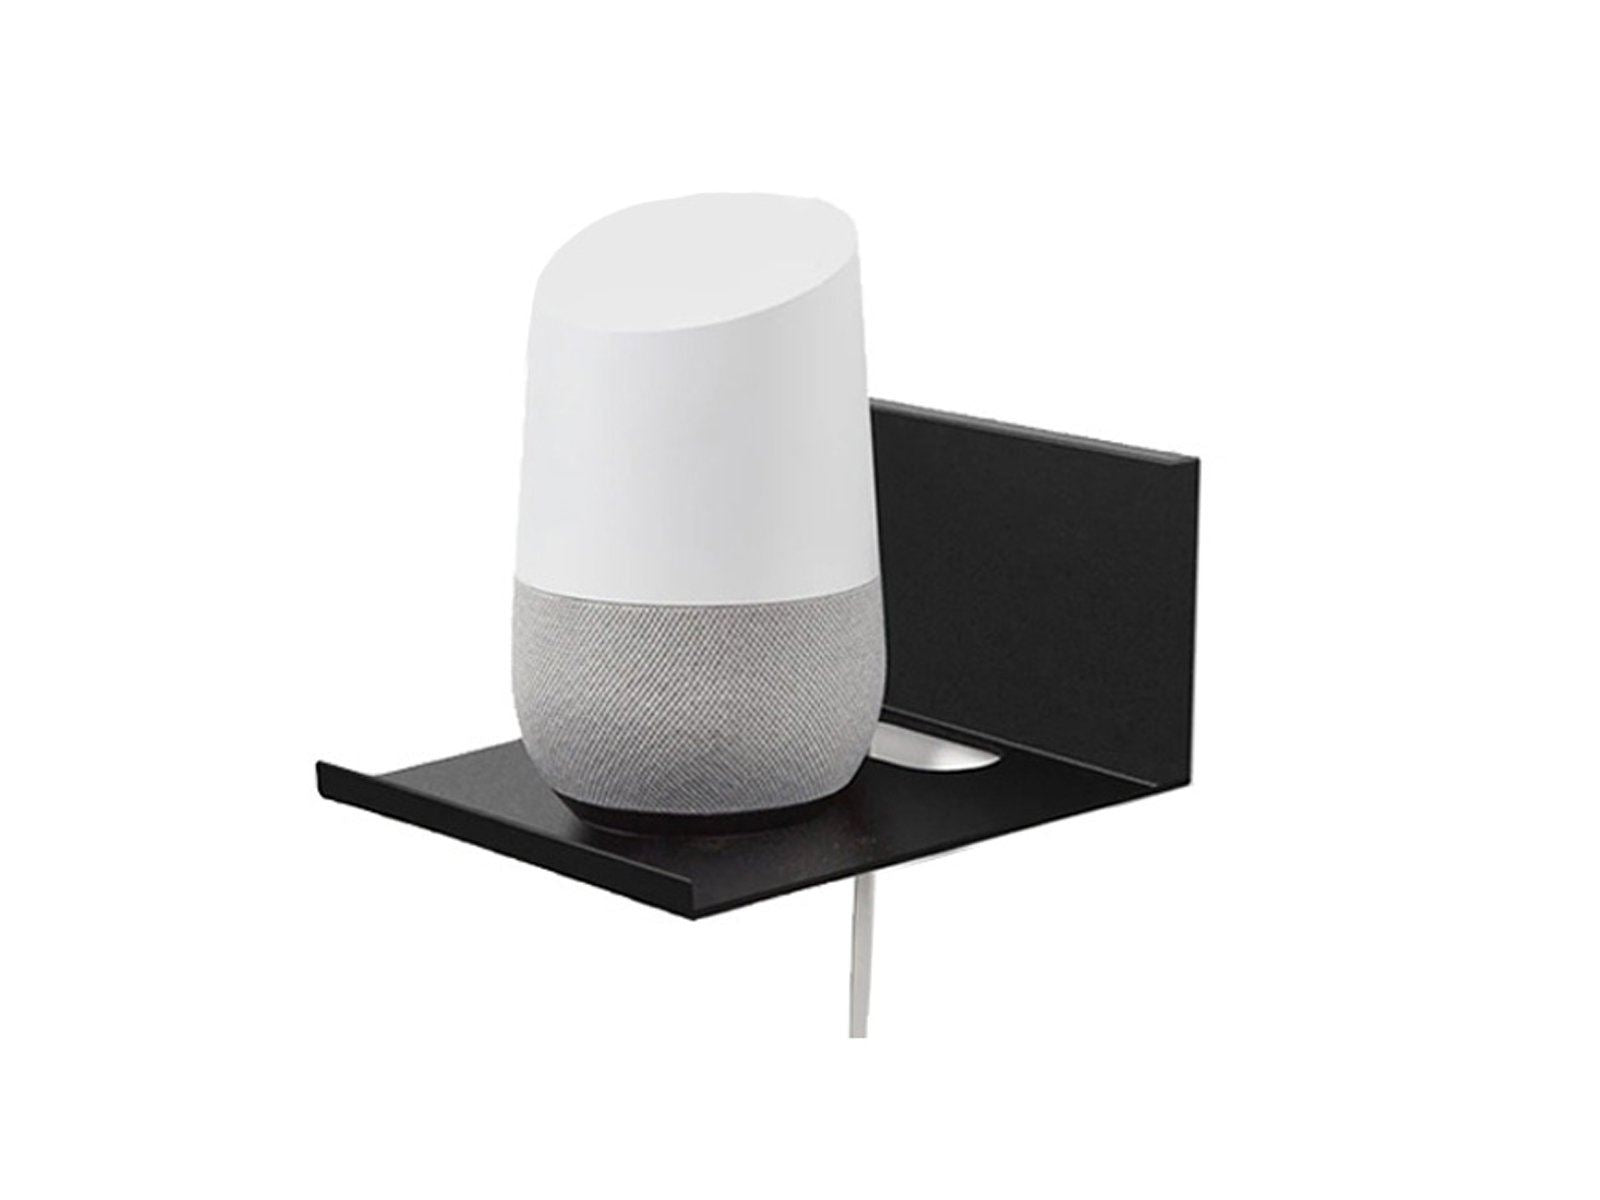 Google home smart device placed on the black Overhead view of the White Hangman No Stud Smart Home Assistant Speaker Bracket with all included fixings